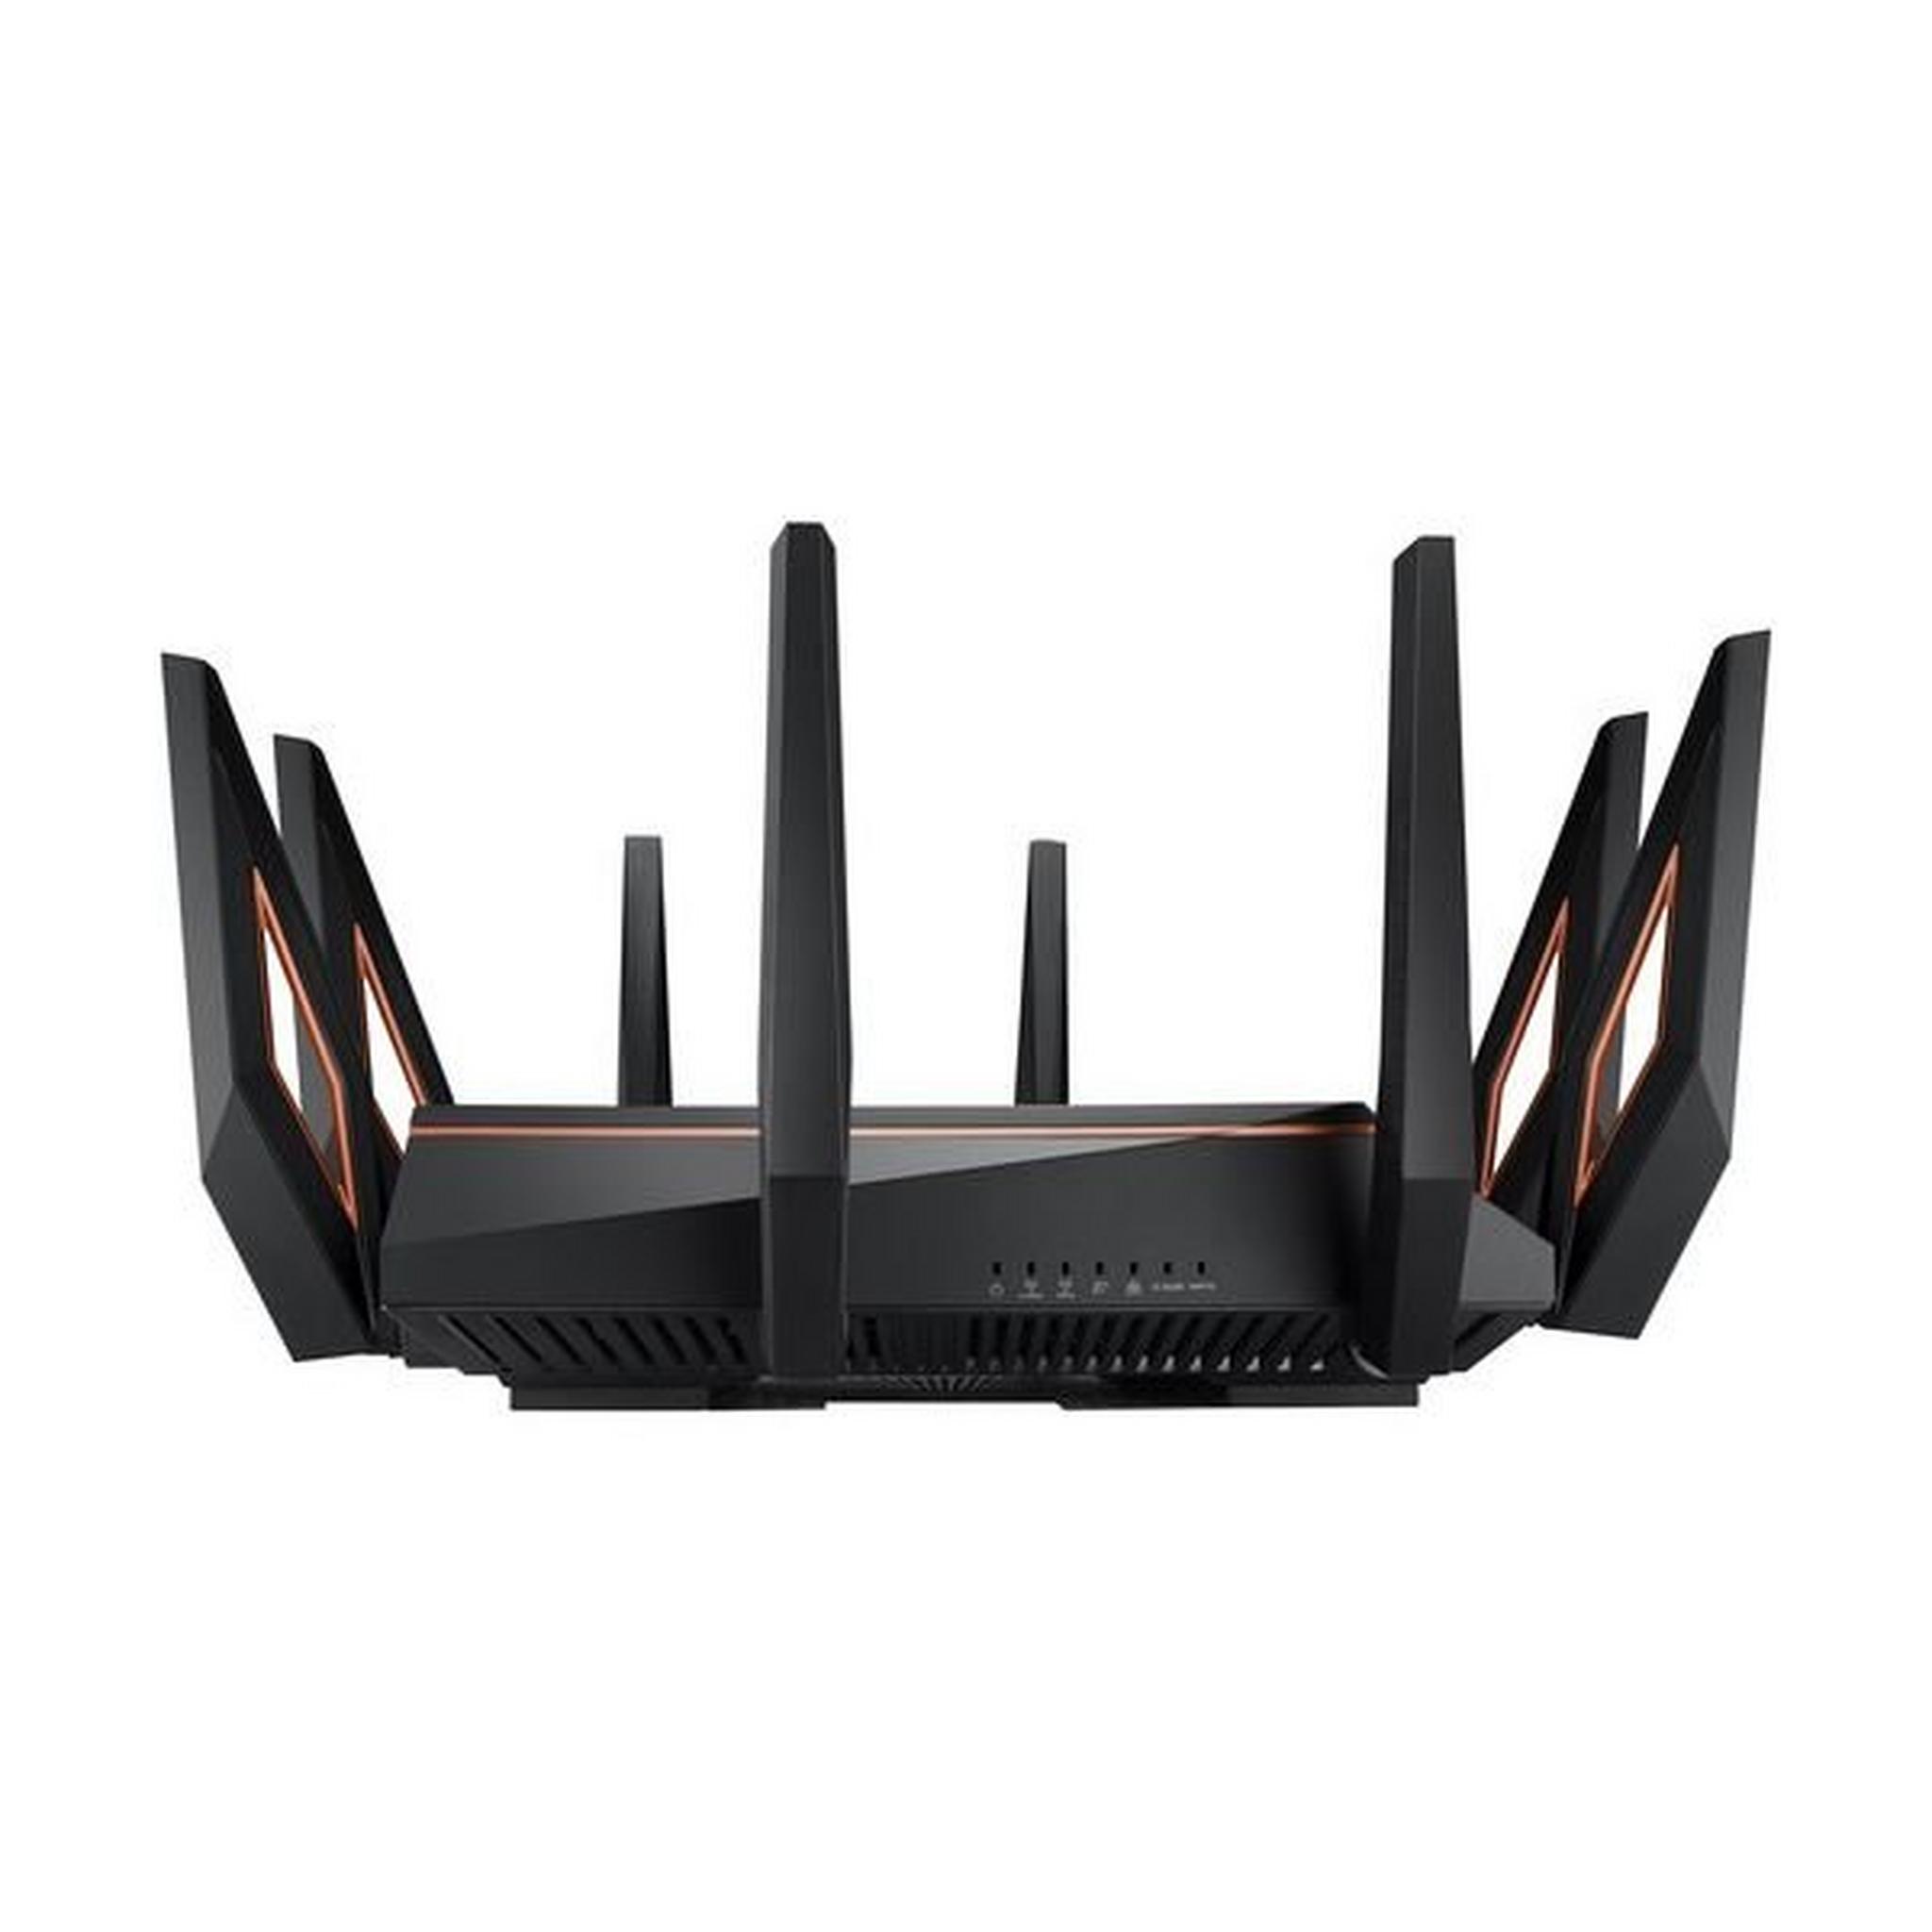 Asus ROG GT-AX11000 Tri-Band Wi-Fi Gaming Router